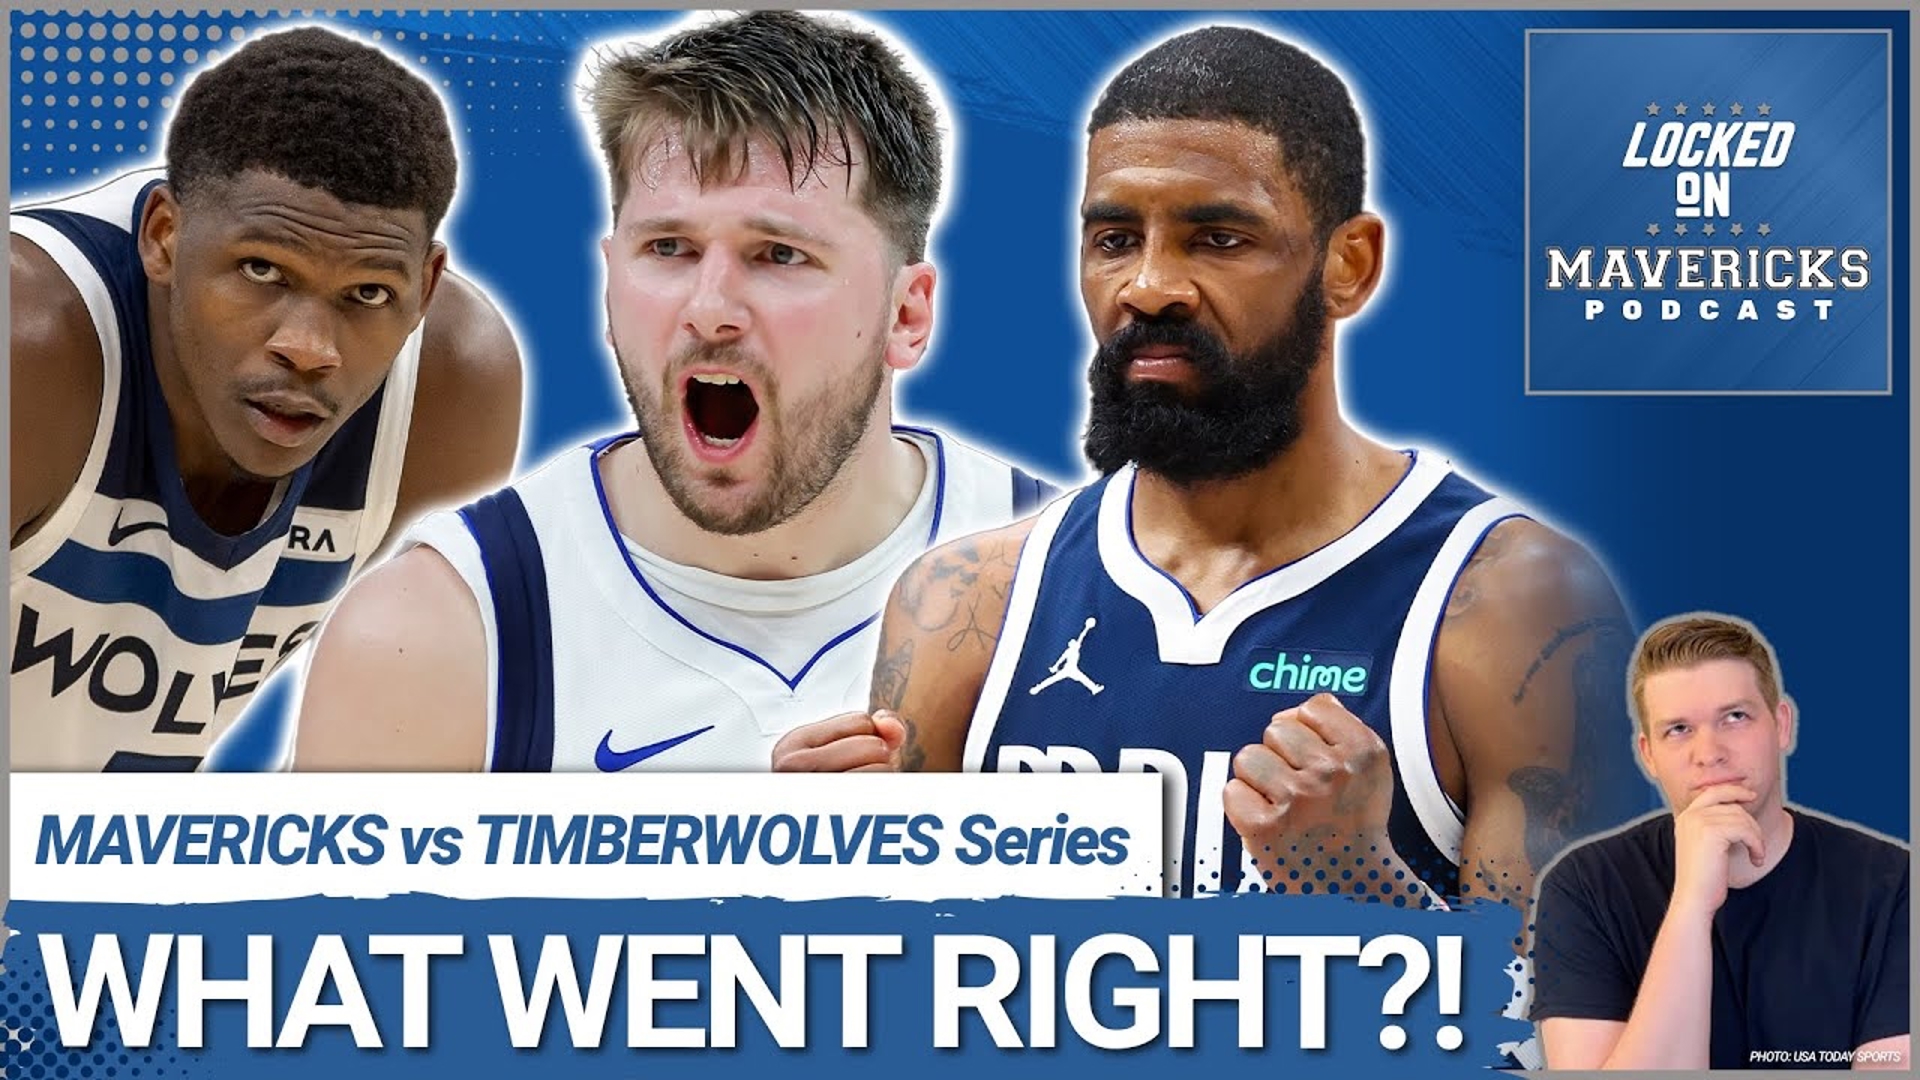 The Dallas Mavericks beat the Minnesota Timberwolves in Game 1 of the NBA's Western Conference Finals. What did the Mavs do right, and what's in store for Game 2?